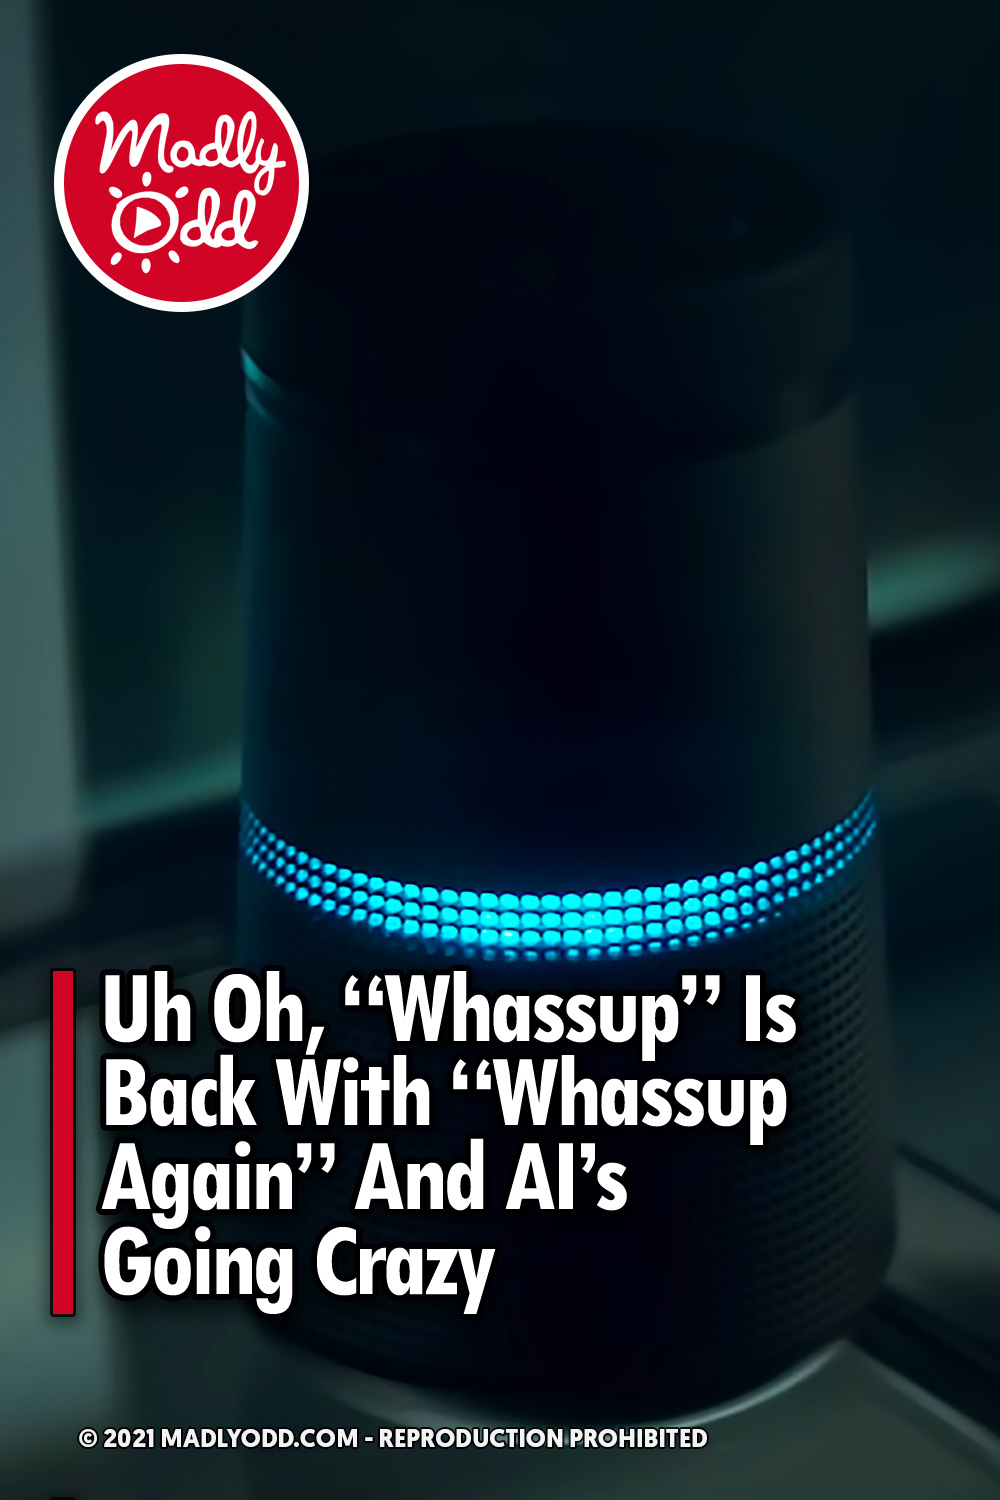 Uh Oh, “Whassup” Is Back With “Whassup Again” And AI’s Going Crazy